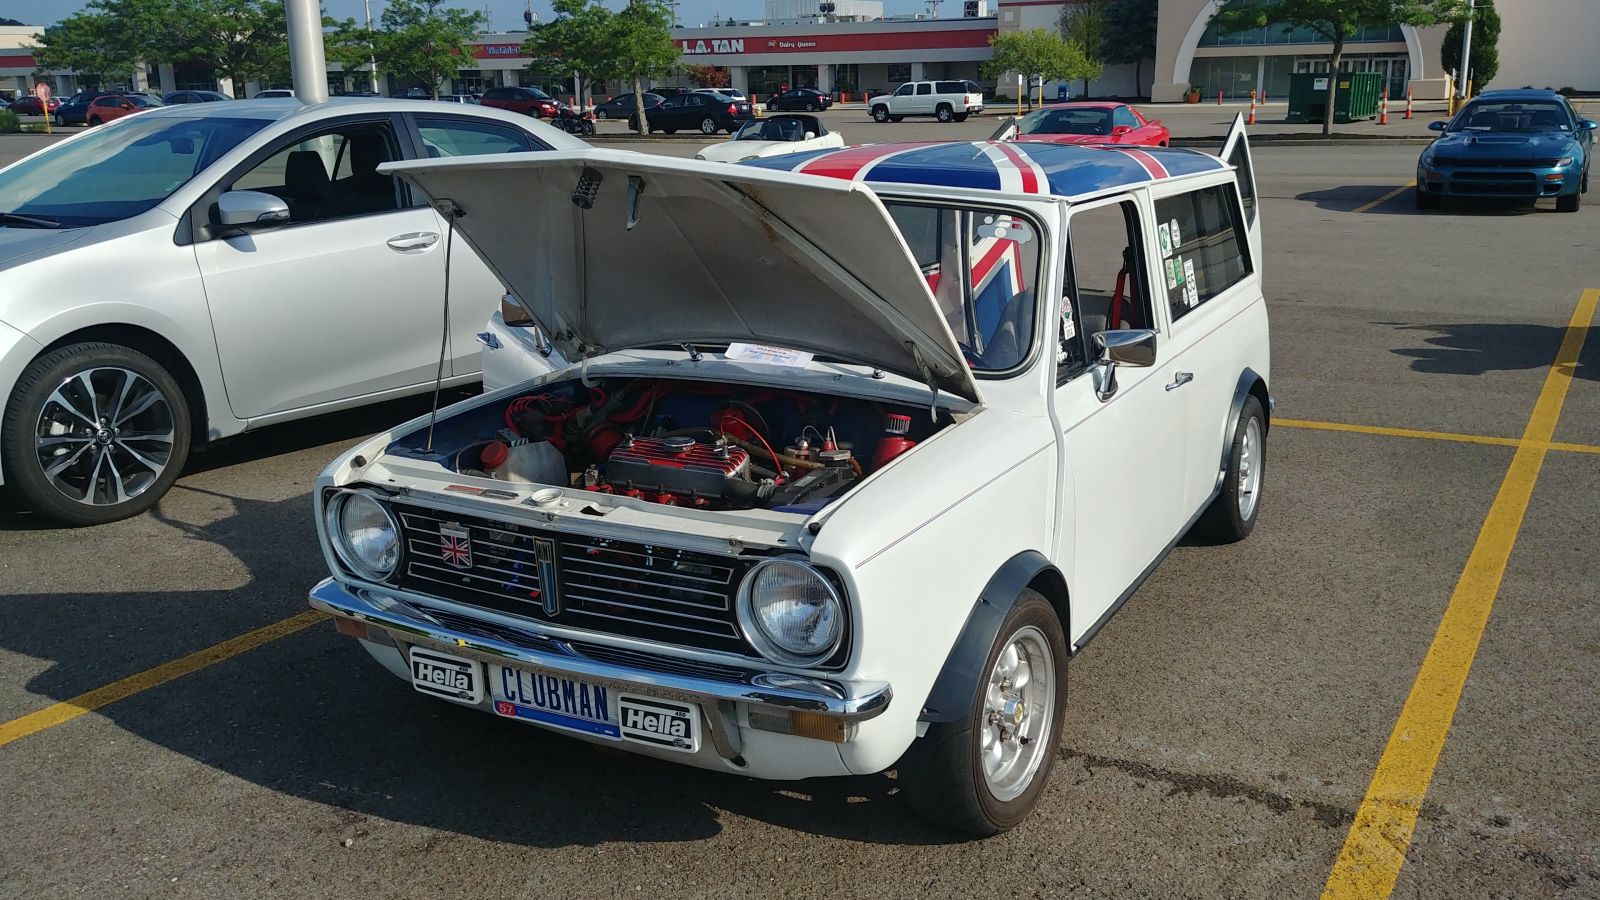 Another Mini, a Clubman!